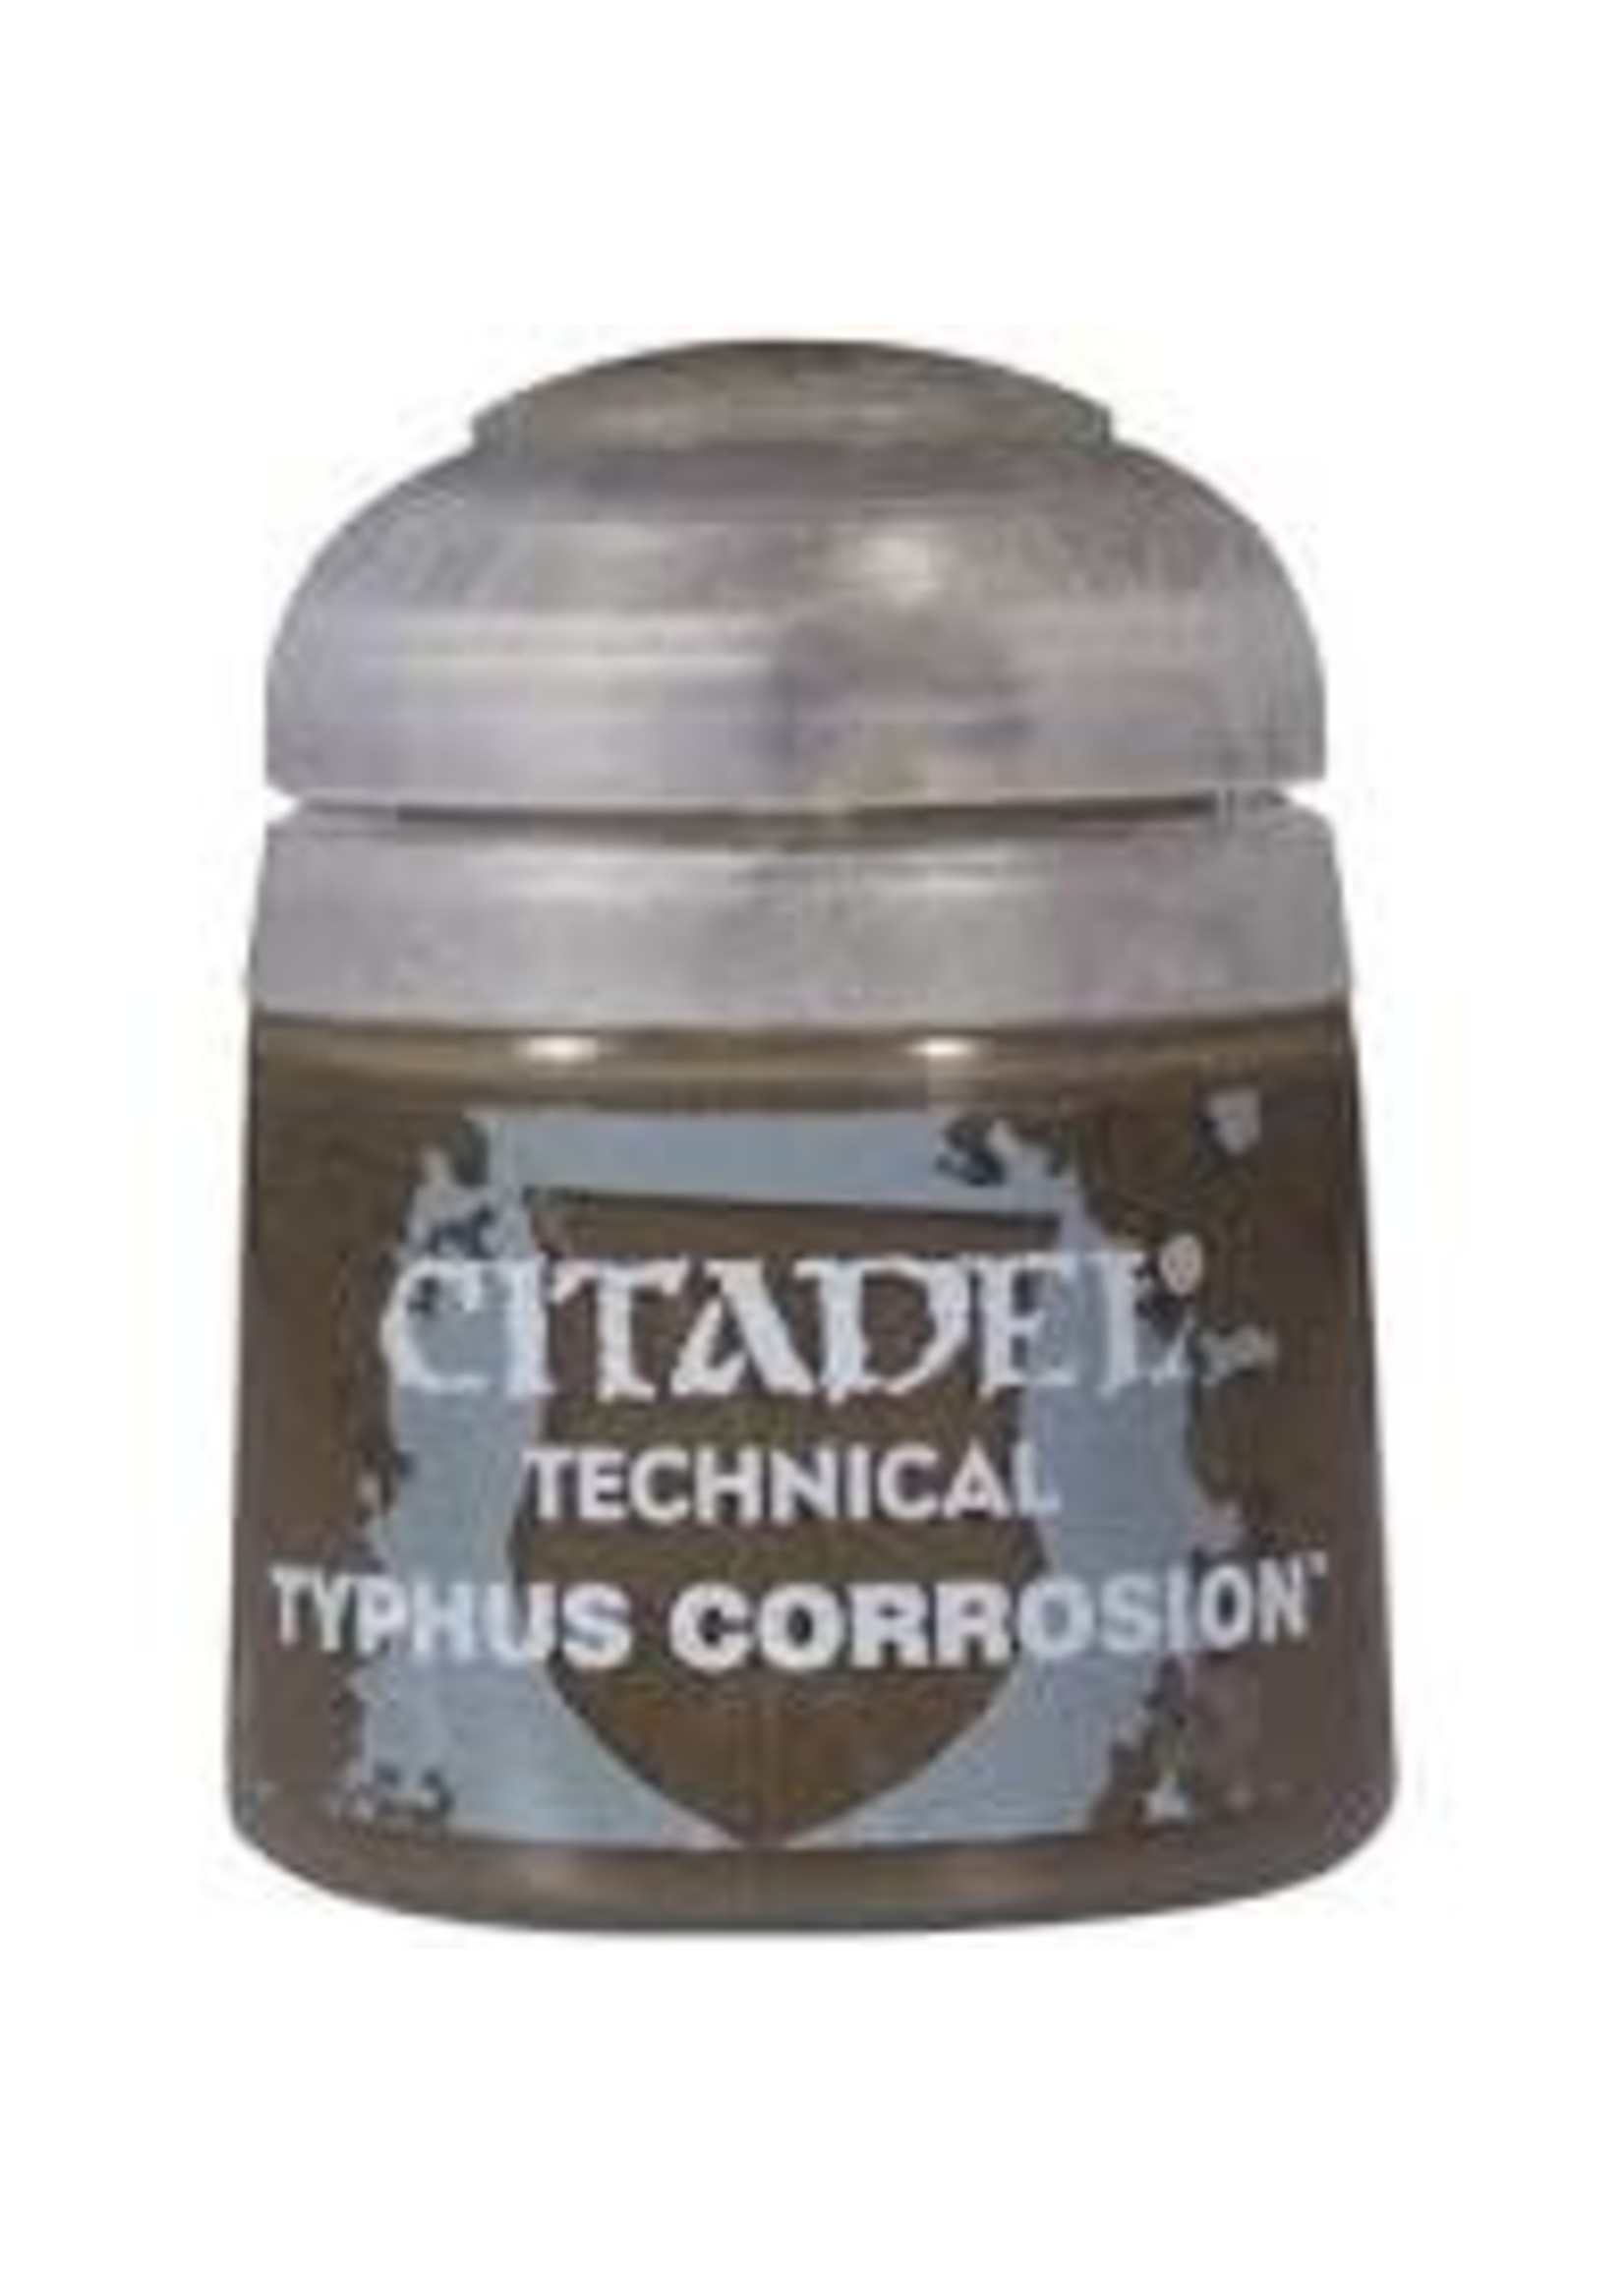 Games Workshop Technical: Typhus Corrosion